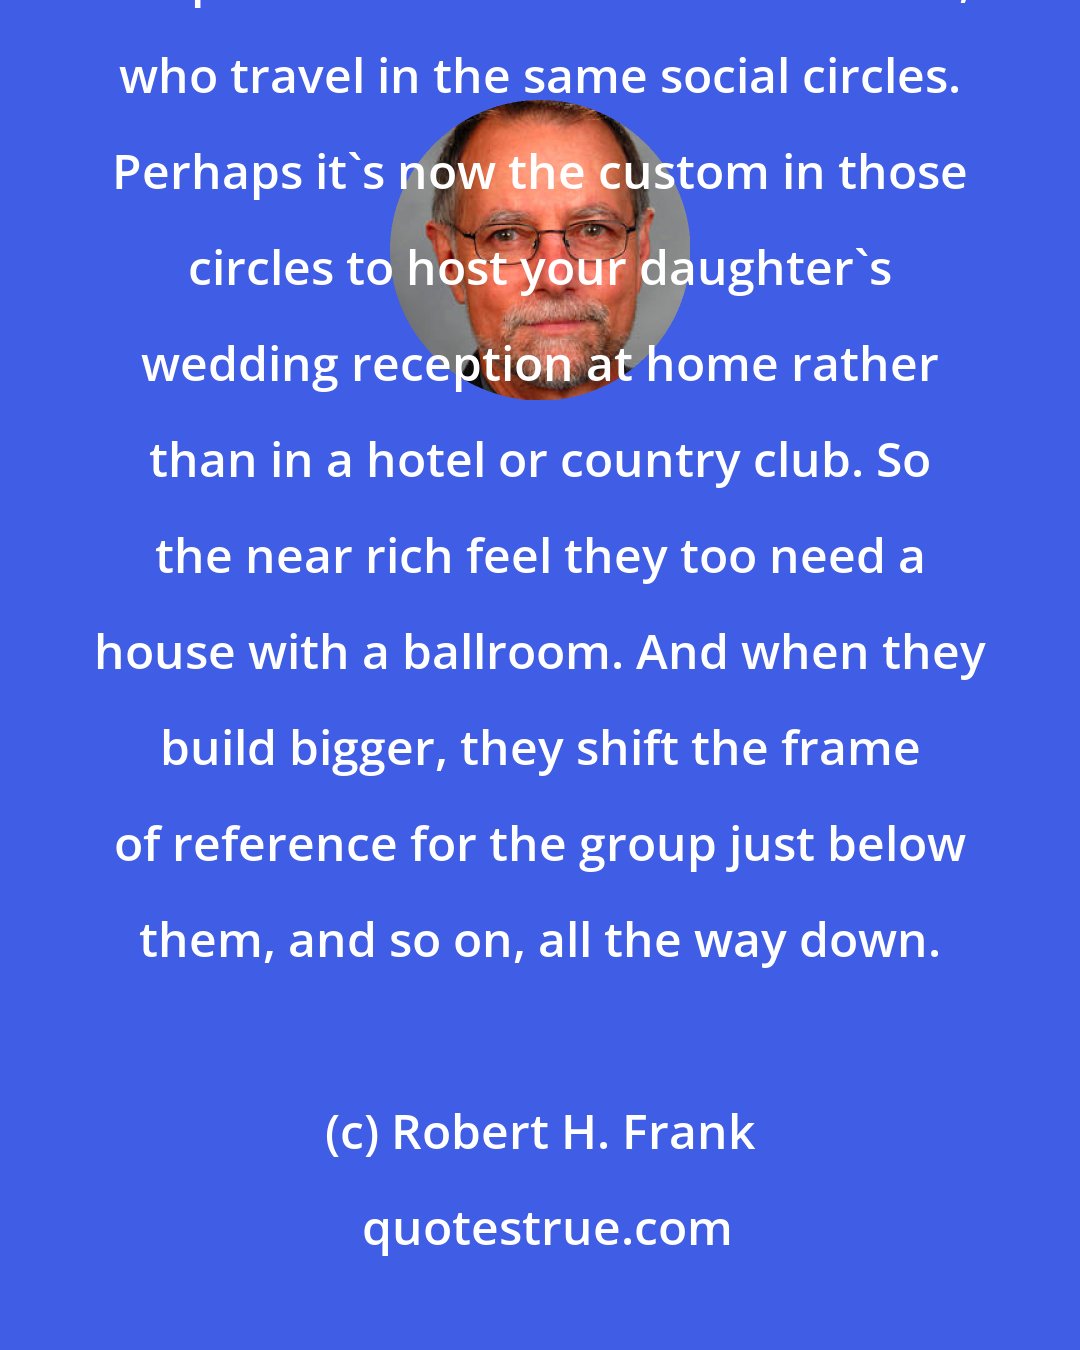 Robert H. Frank: When the rich build bigger, they shift the frame of reference that shapes the demands of the near rich, who travel in the same social circles. Perhaps it's now the custom in those circles to host your daughter's wedding reception at home rather than in a hotel or country club. So the near rich feel they too need a house with a ballroom. And when they build bigger, they shift the frame of reference for the group just below them, and so on, all the way down.